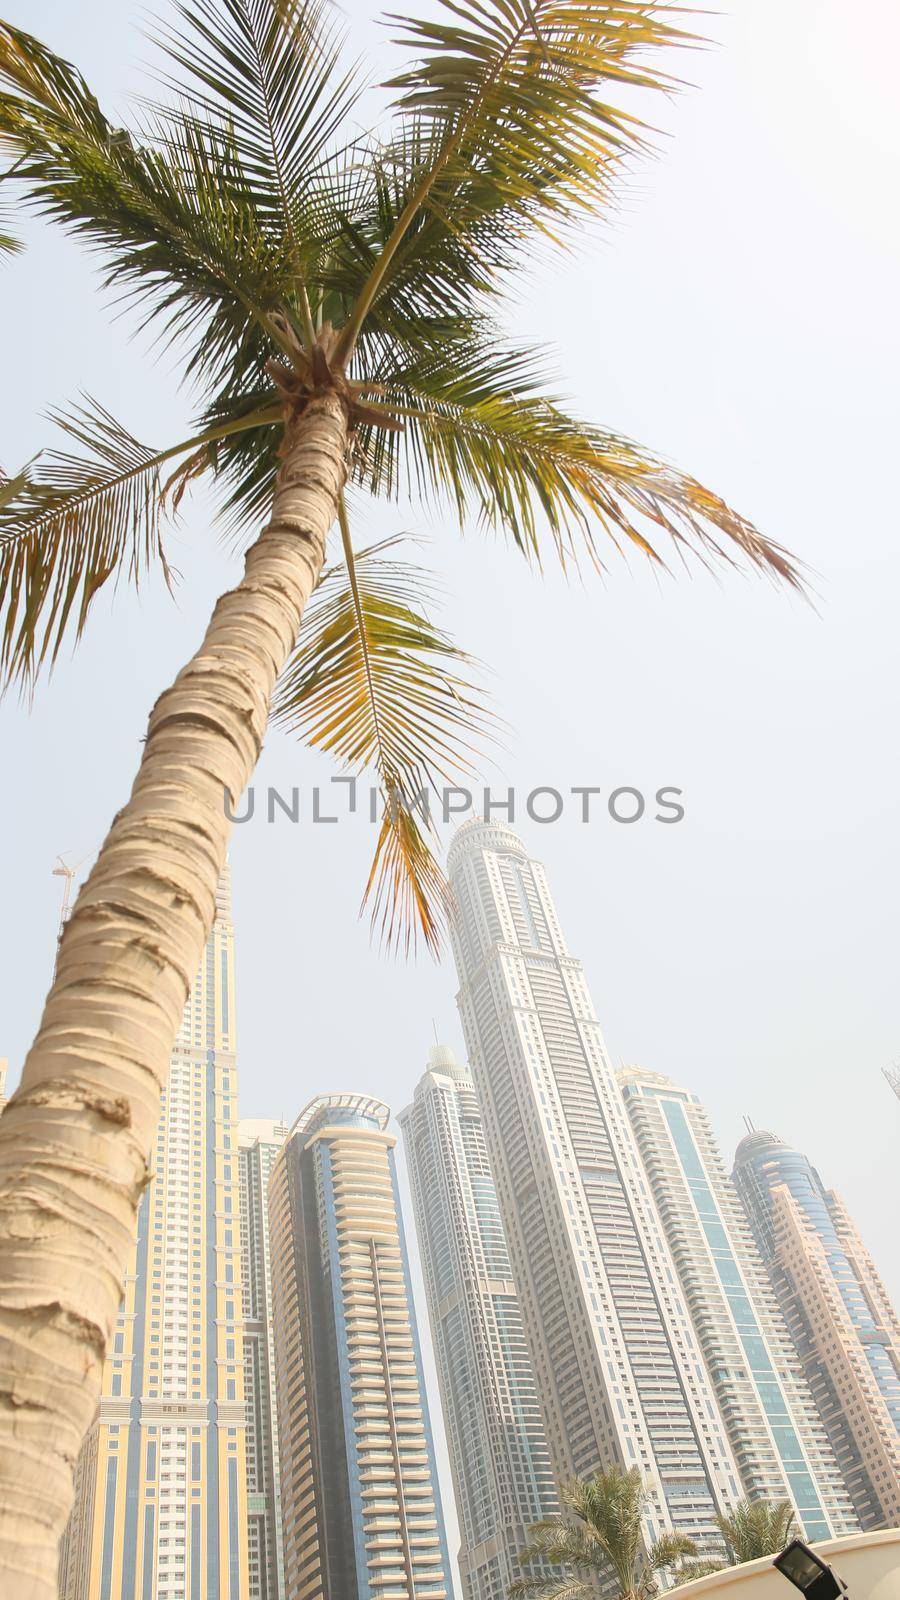 Residential skyscrapers with apartments against the backdrop of palm trees in Dubai. UAE. by DovidPro